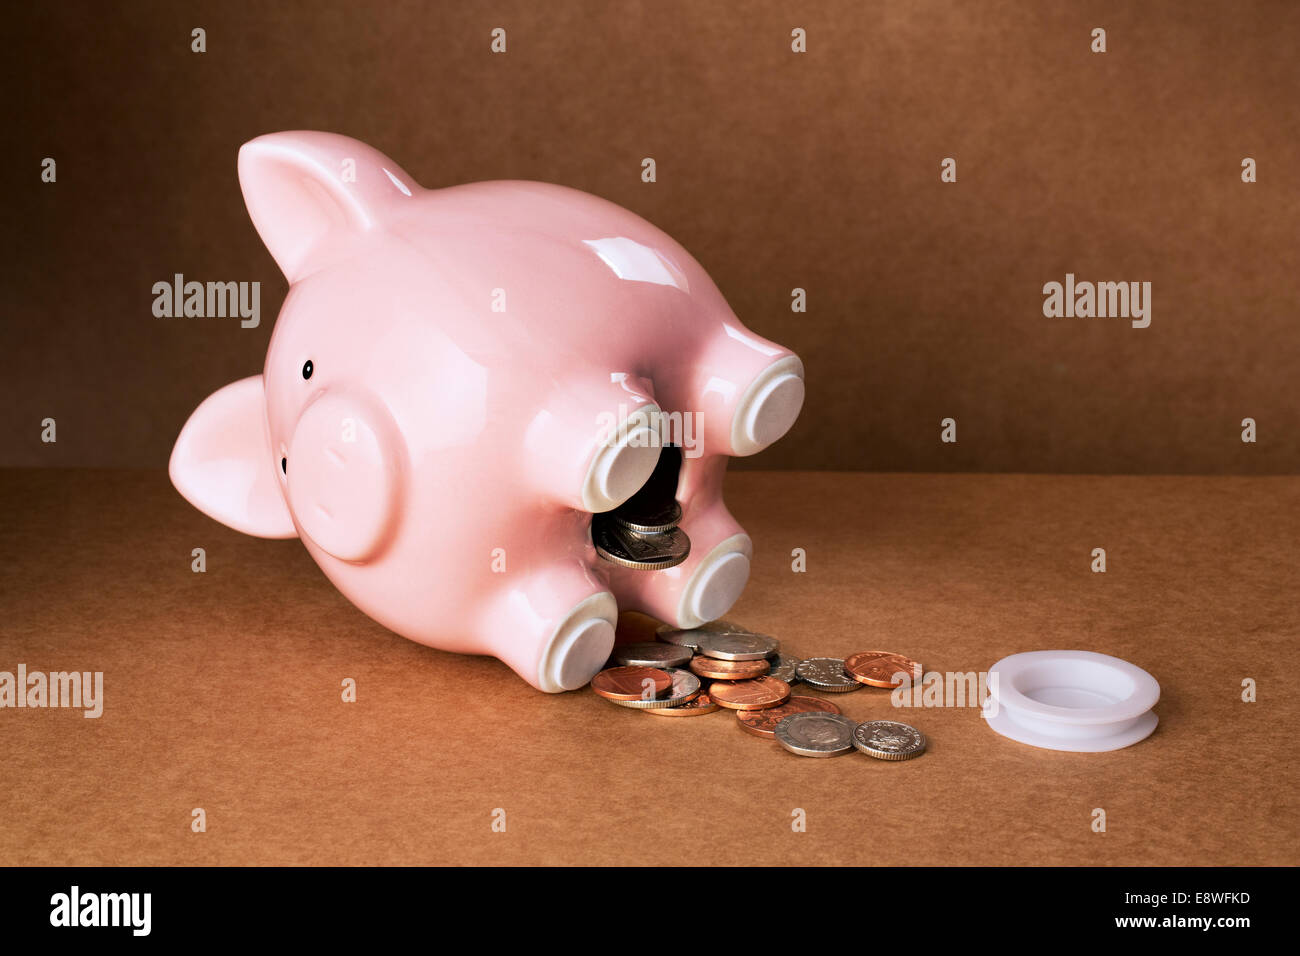 Piggy bank spilling out change onto counter Stock Photo